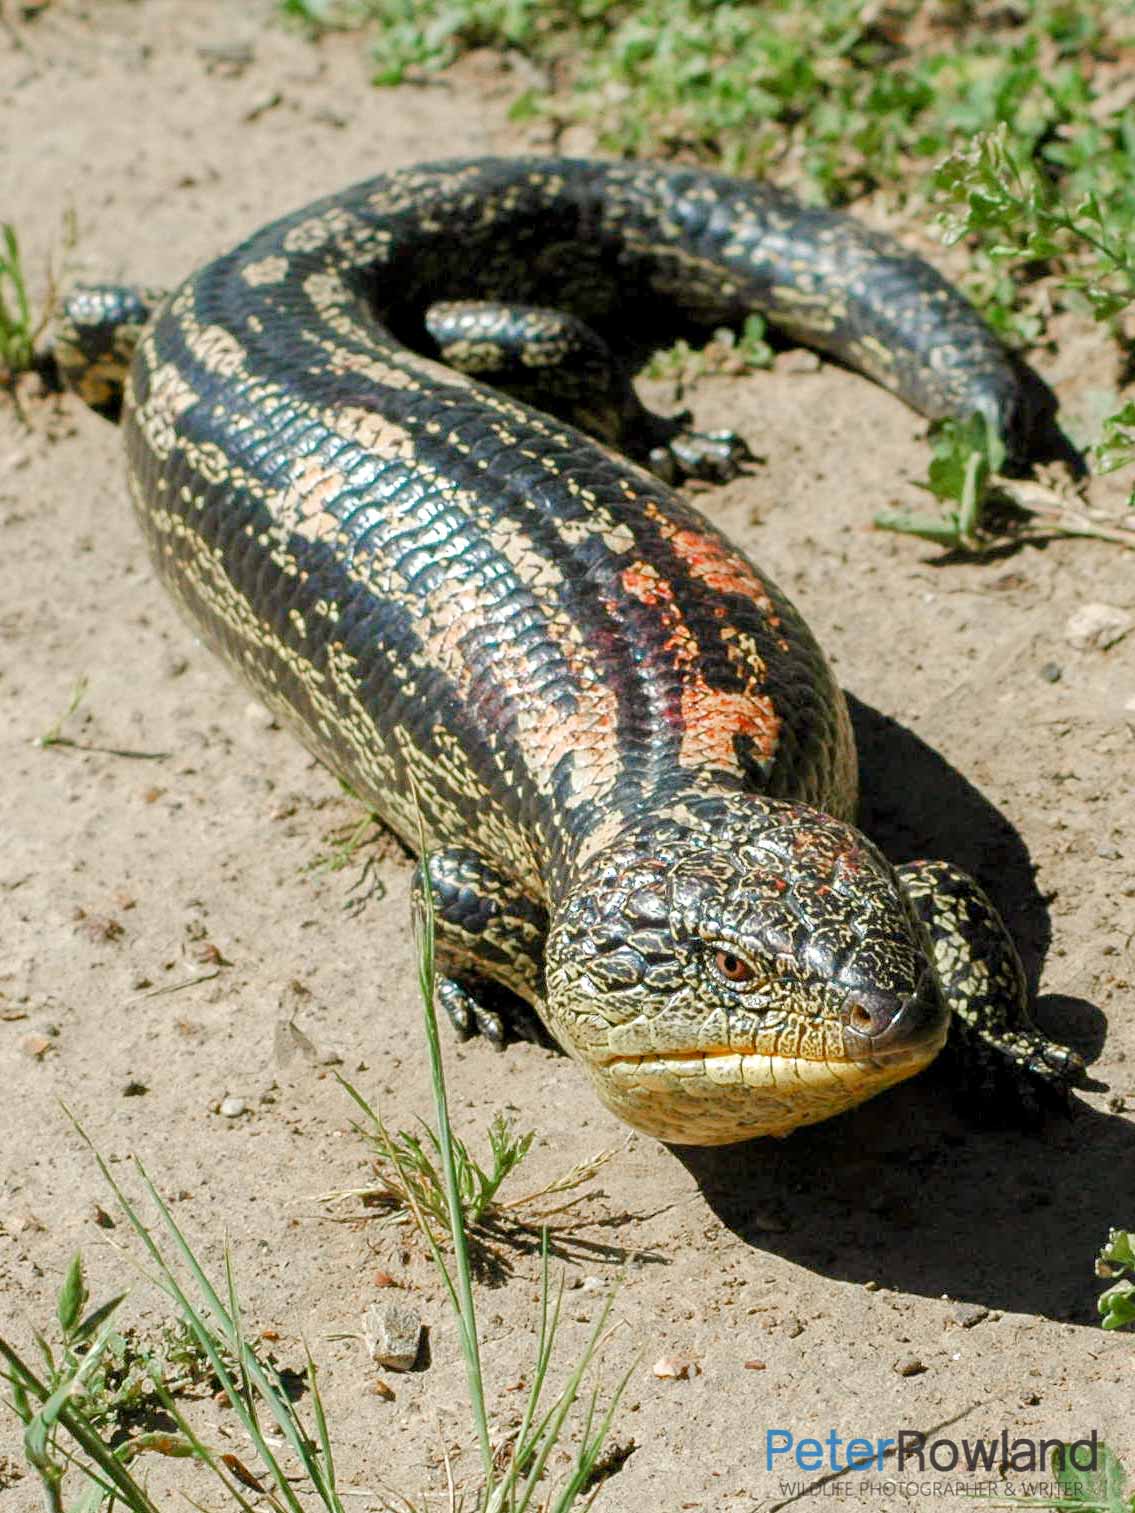 A Blotched Blue-Tongue lizard basking on the bare ground